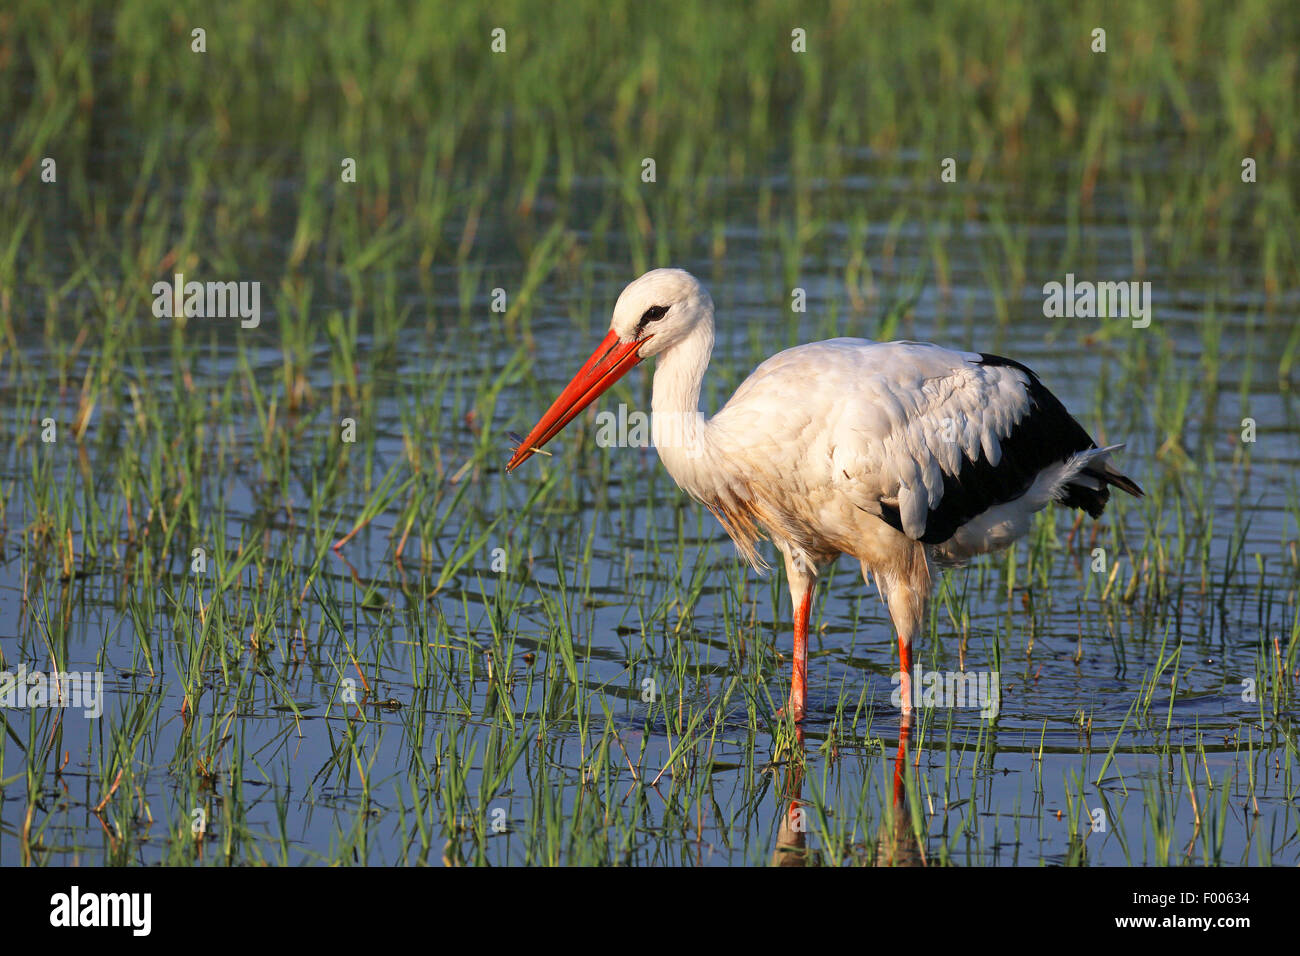 white stork (Ciconia ciconia), looking for food in shallow water, Greece, Lake Kerkini Stock Photo